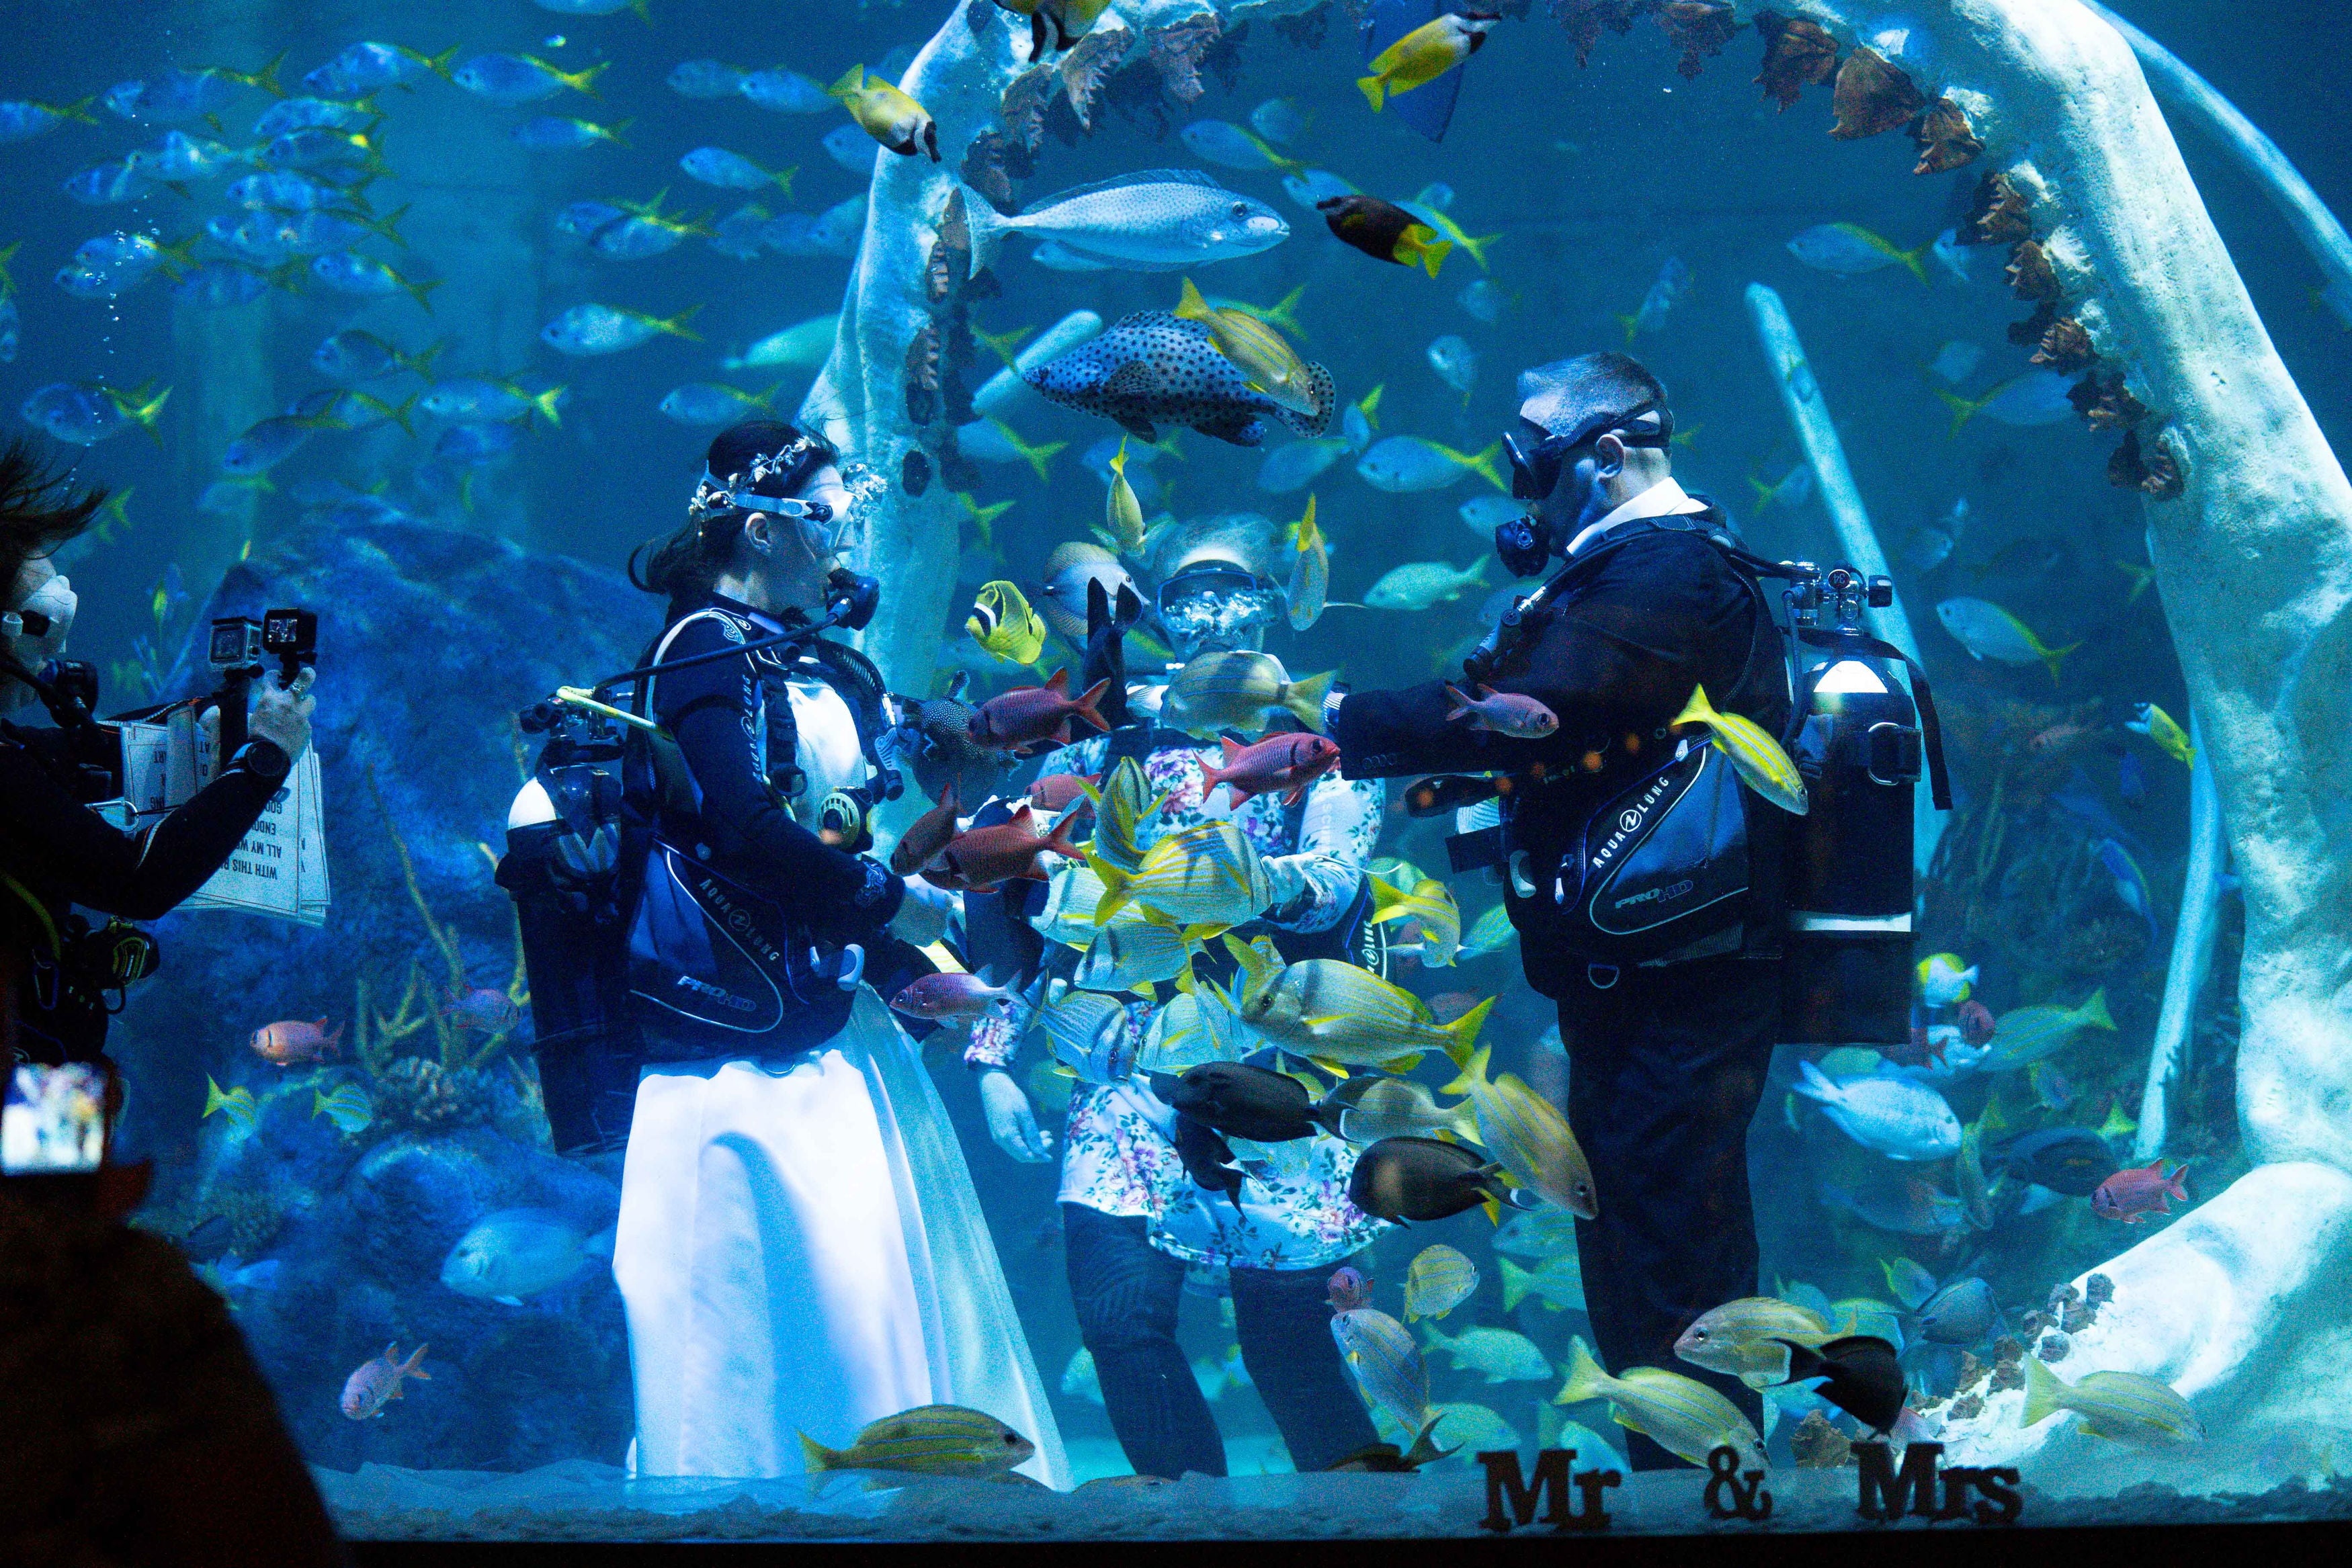 Couple Get Married Underwater In Tank With Reef Sharks The Independent